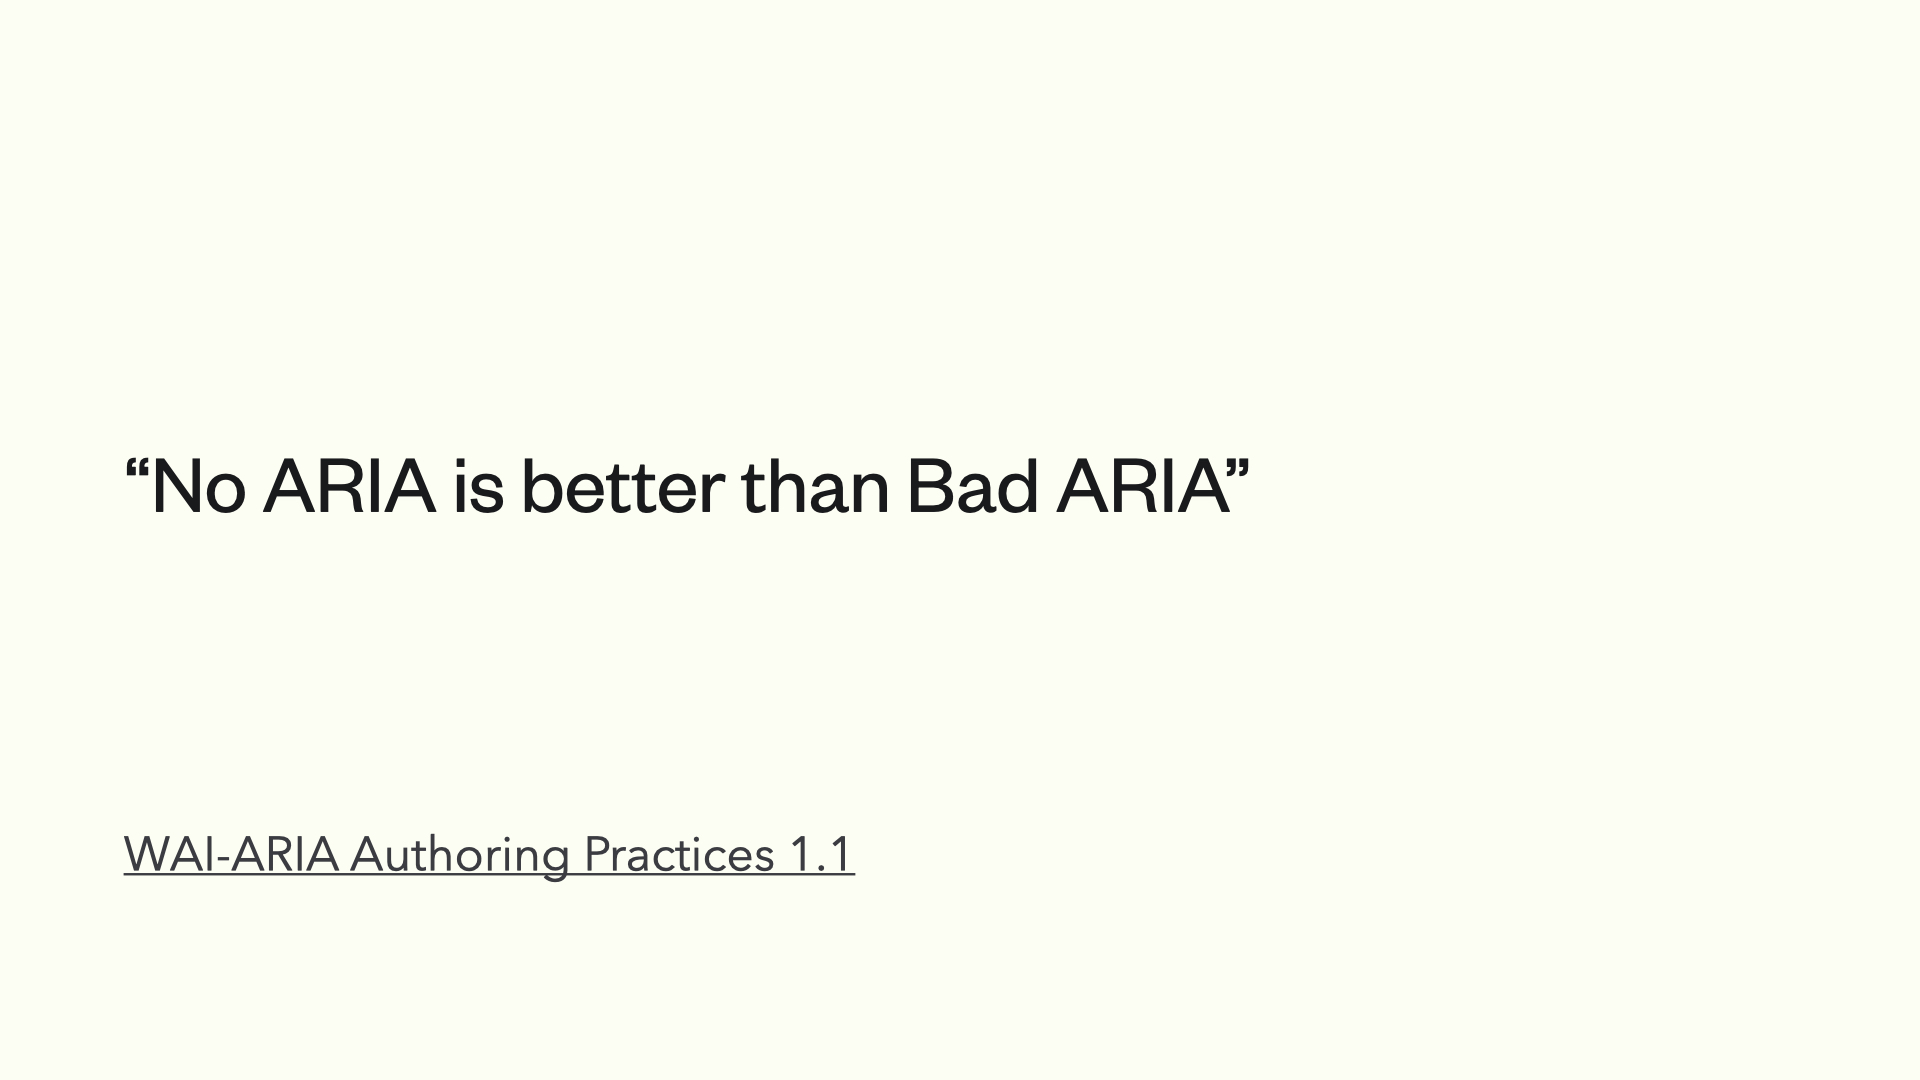 WAI-ARIA Authoring Practices 1.1 からの引用 No ARIA is better than Bad ARIA